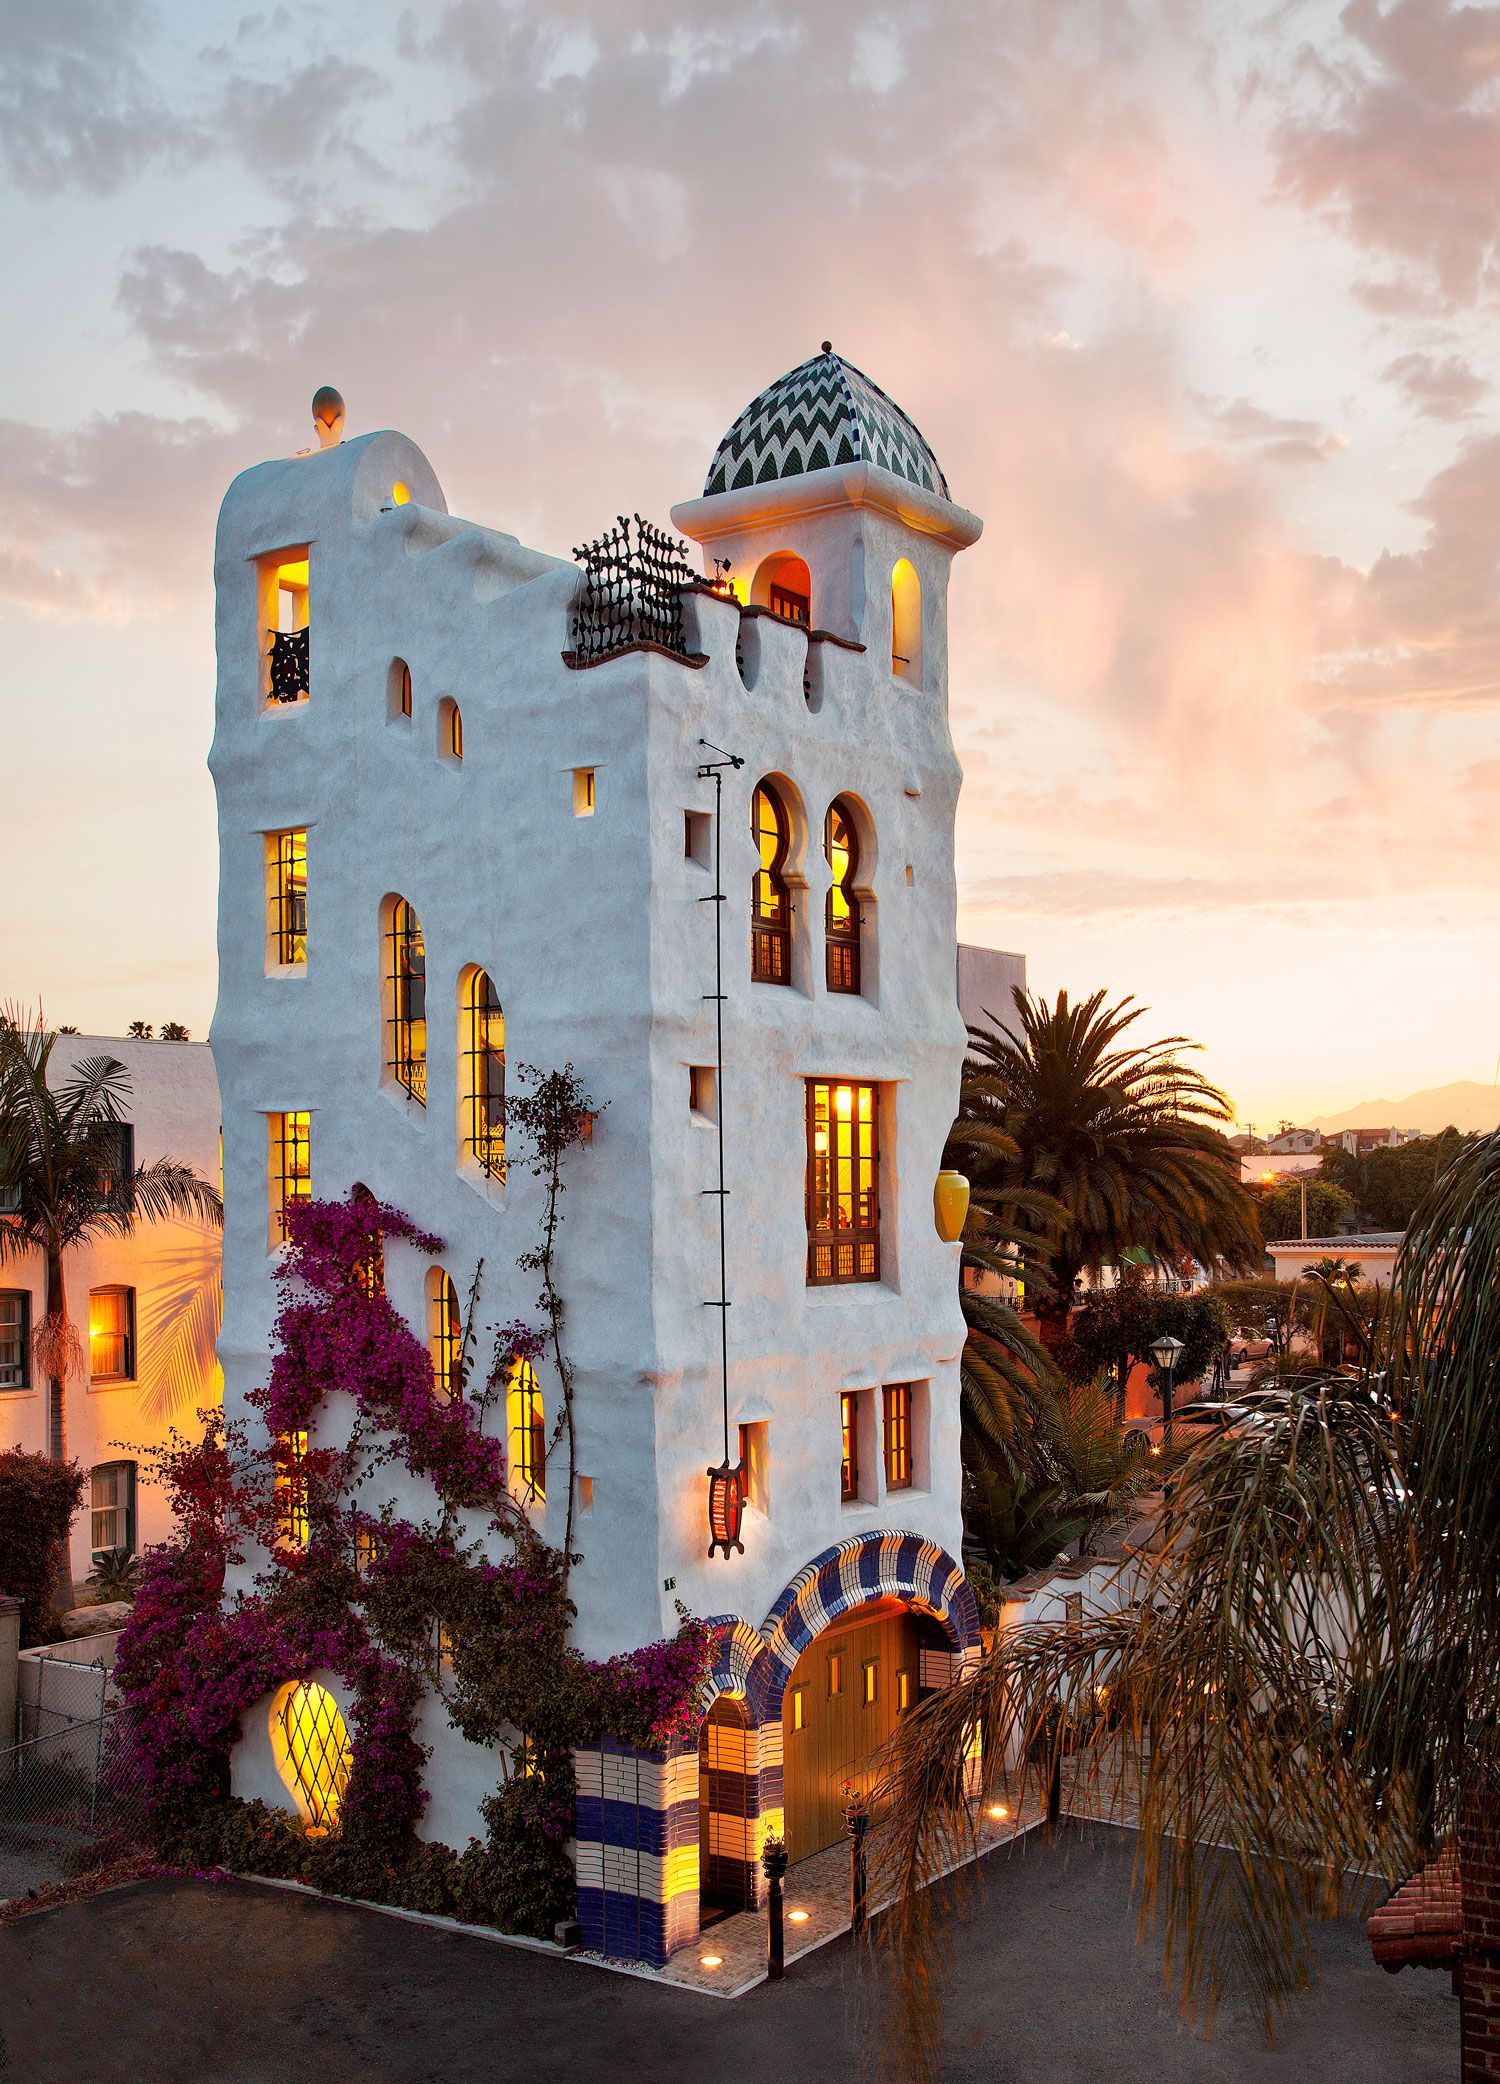 The Jeff Shelton-designed, 5-story, Ablitt Tower near downtown Santa Barbara, displaying the architect's whimsical, Dr. Seuss-like design elements, and illuminated from within at dusk.